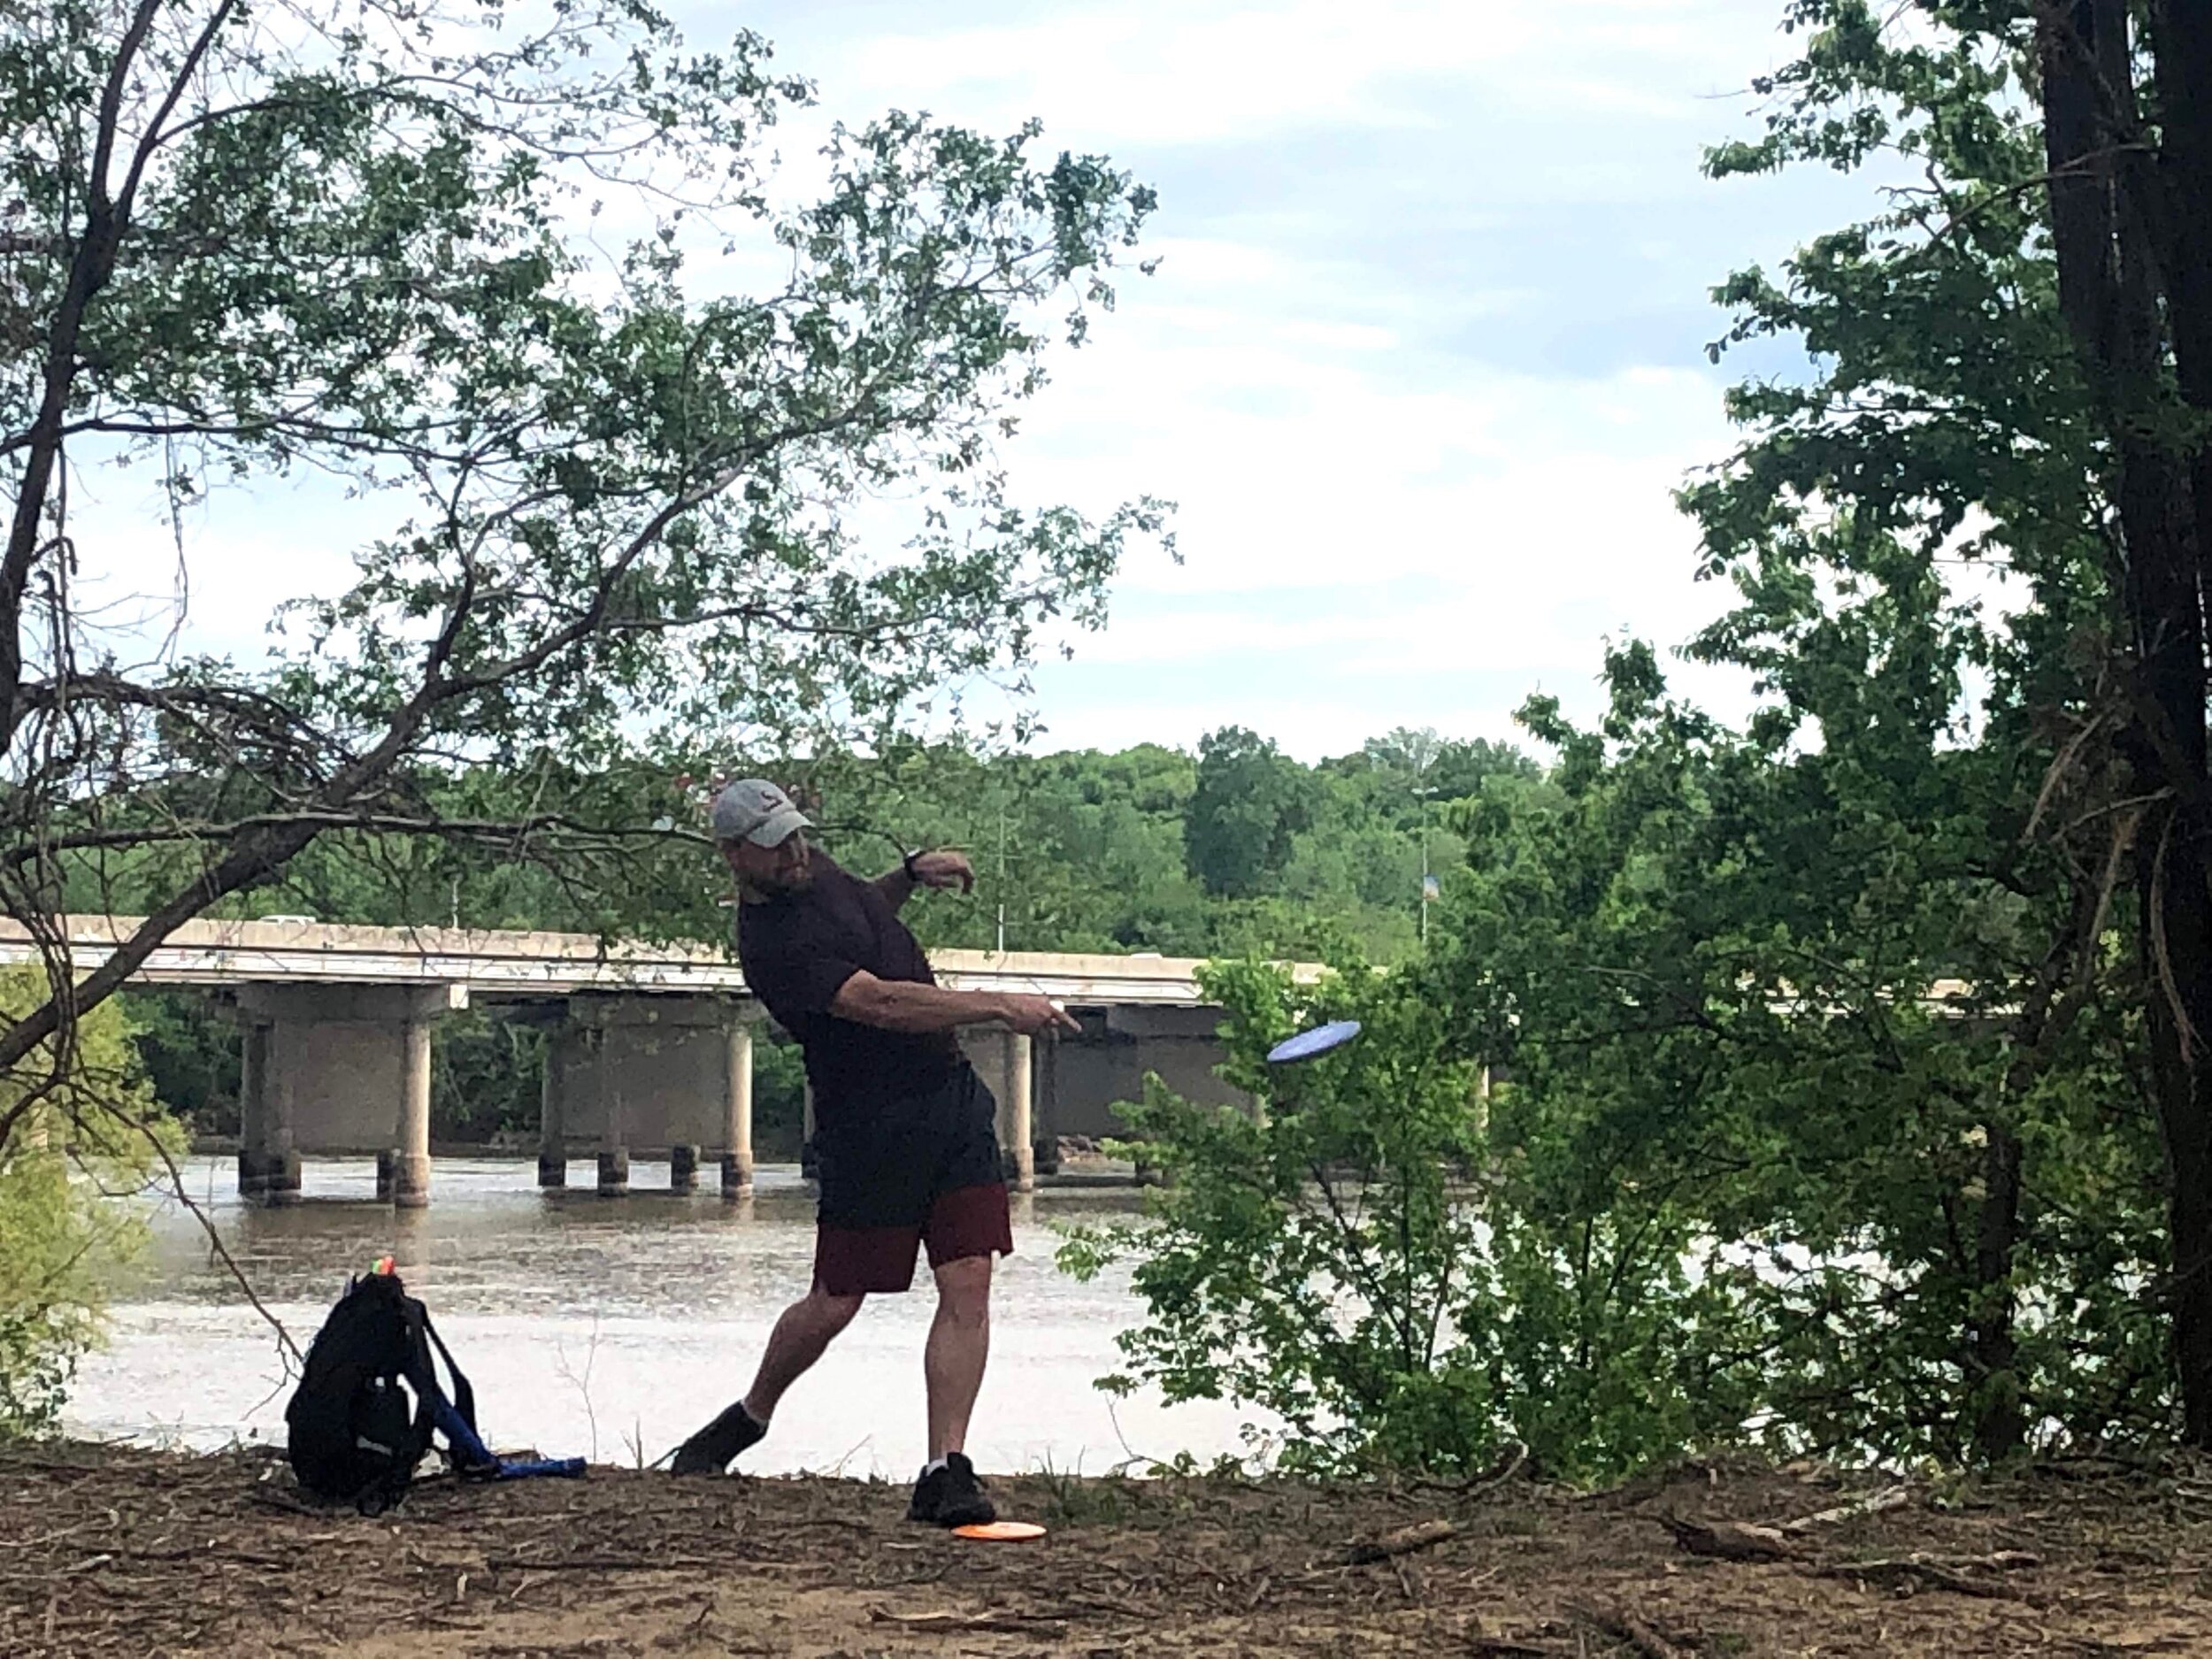 Dwight Griffis throws an up-shot on Hole 15 at the River City disc golf course.